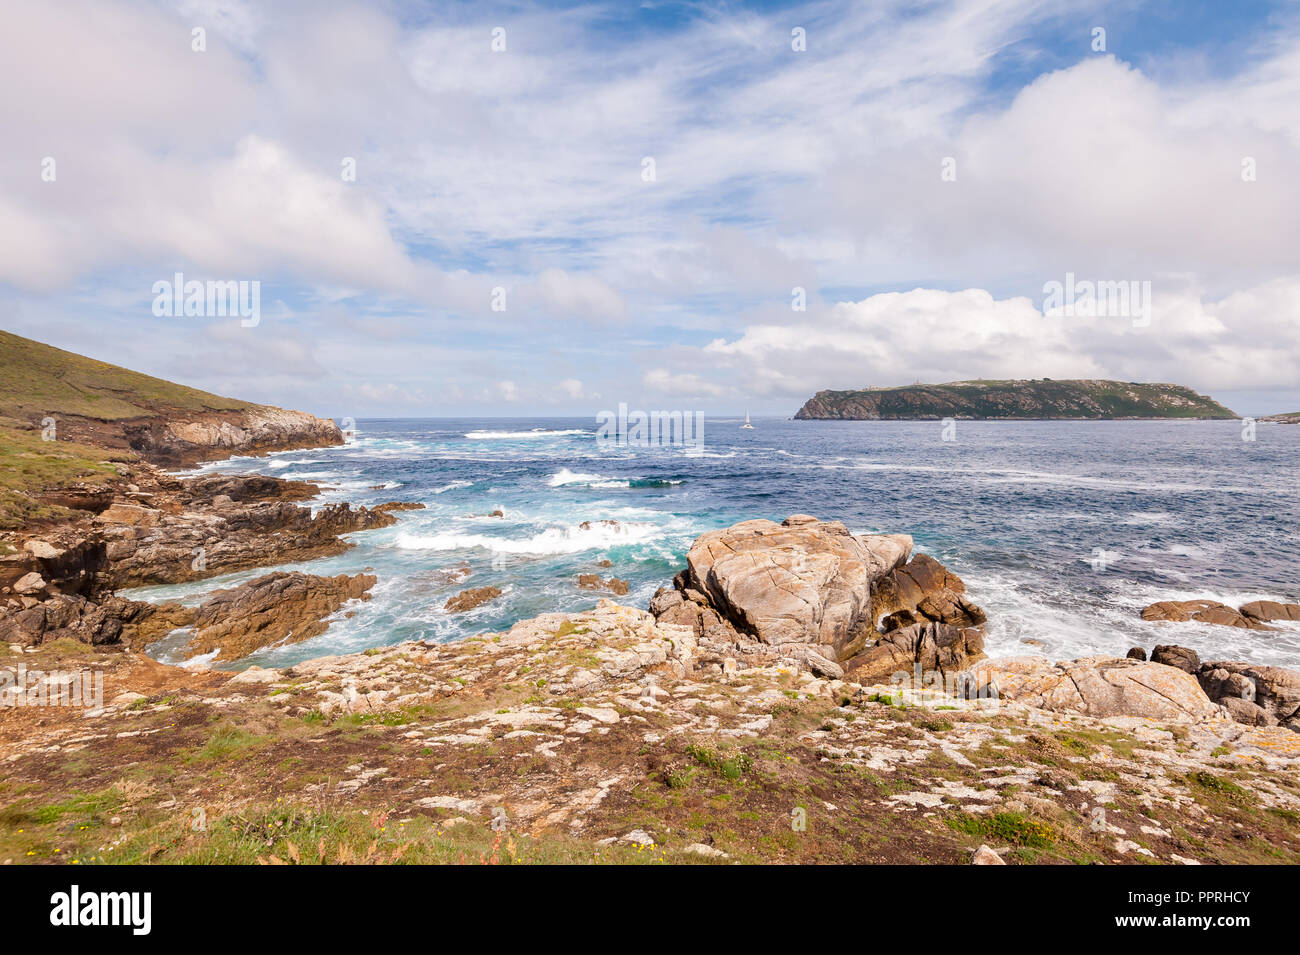 Landscape of sea, cliff blue sky with clouds. Ocean coast in the north west of Spain, Galicia region. Touristic travel. Stock Photo